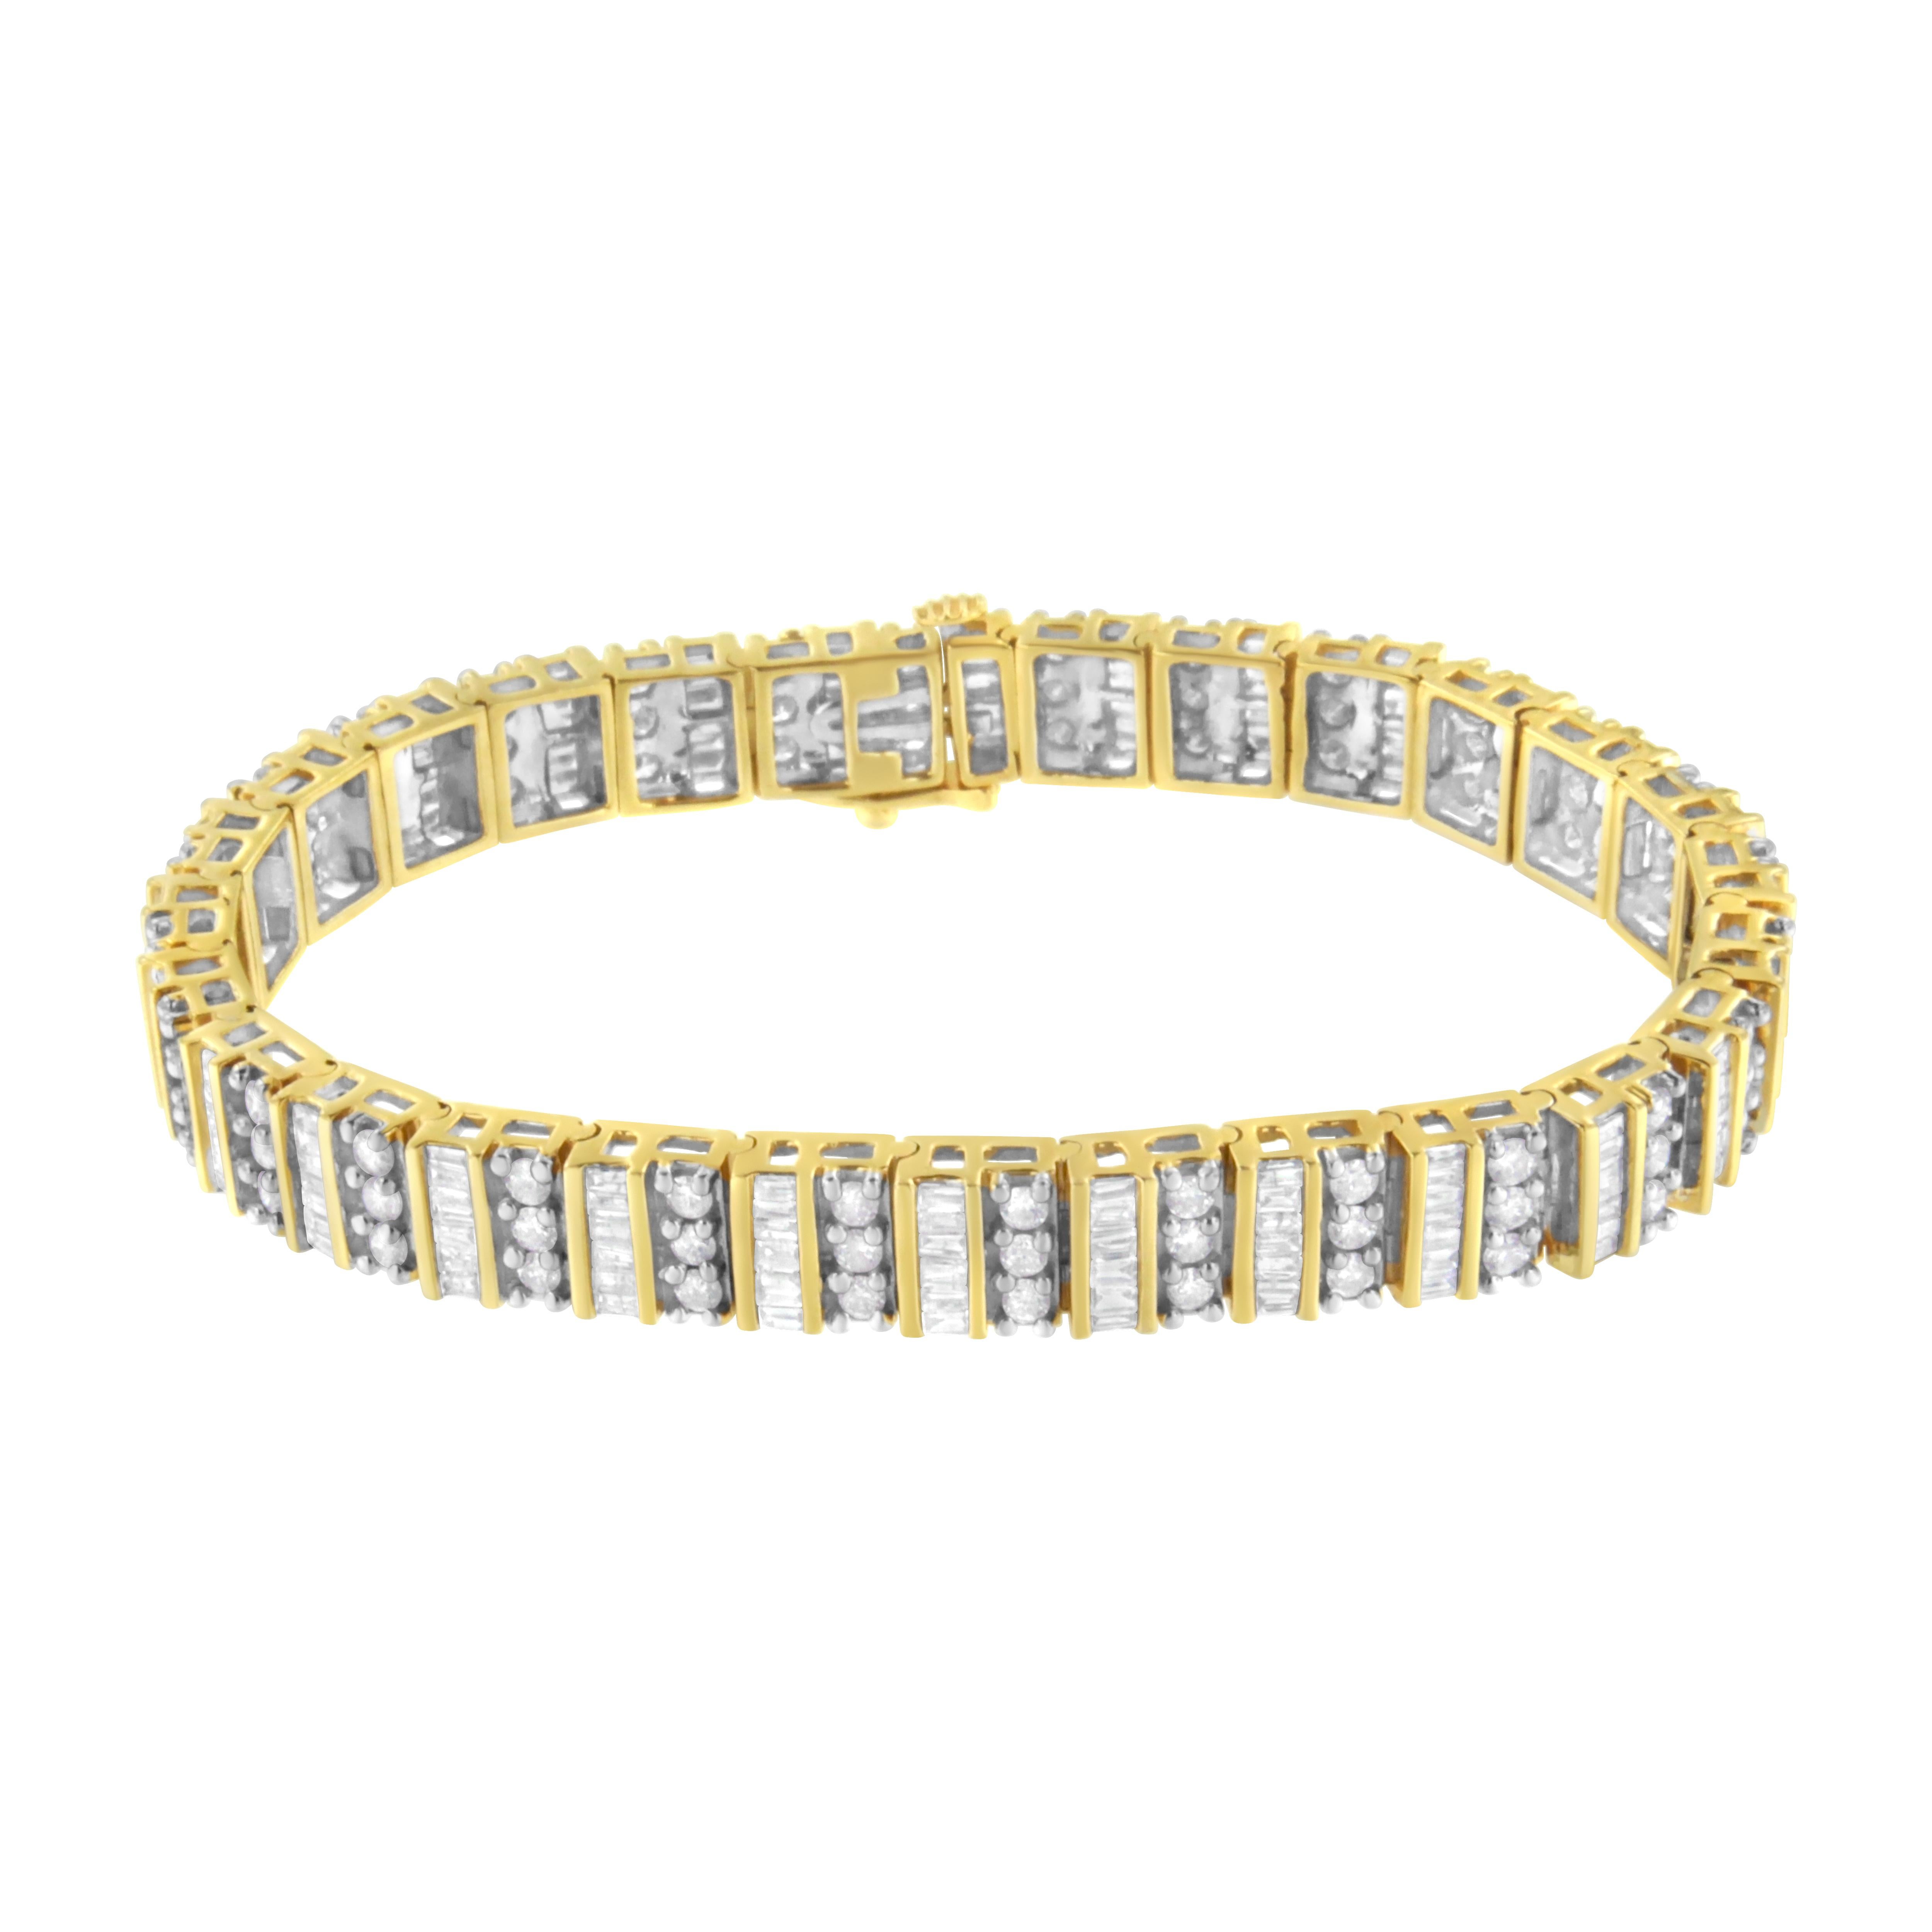 Be a star of the show by wearing this tennis style diamond bracelet. Created with rich 14 karats yellow gold, it is set with shimmering duos of 5 1/2ct round and baguette cut diamonds. Polished high to radiant, this beautiful ornament makes a praise